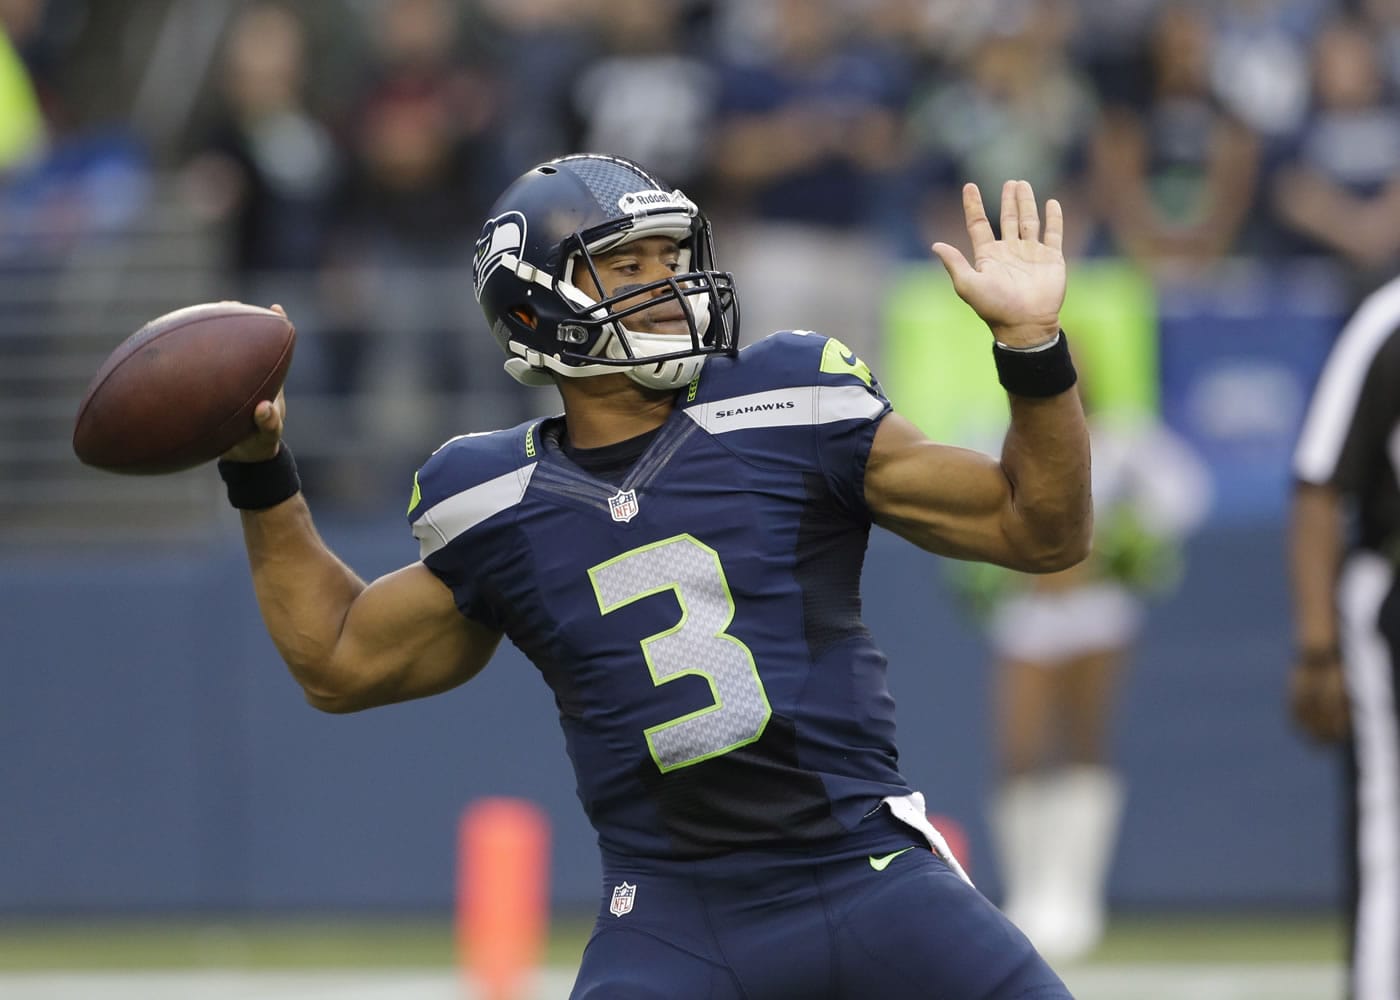 Seahawks starting quarterback Russell Wilson leads a roster of young players into the NFL season today against the Carolina Panthers.